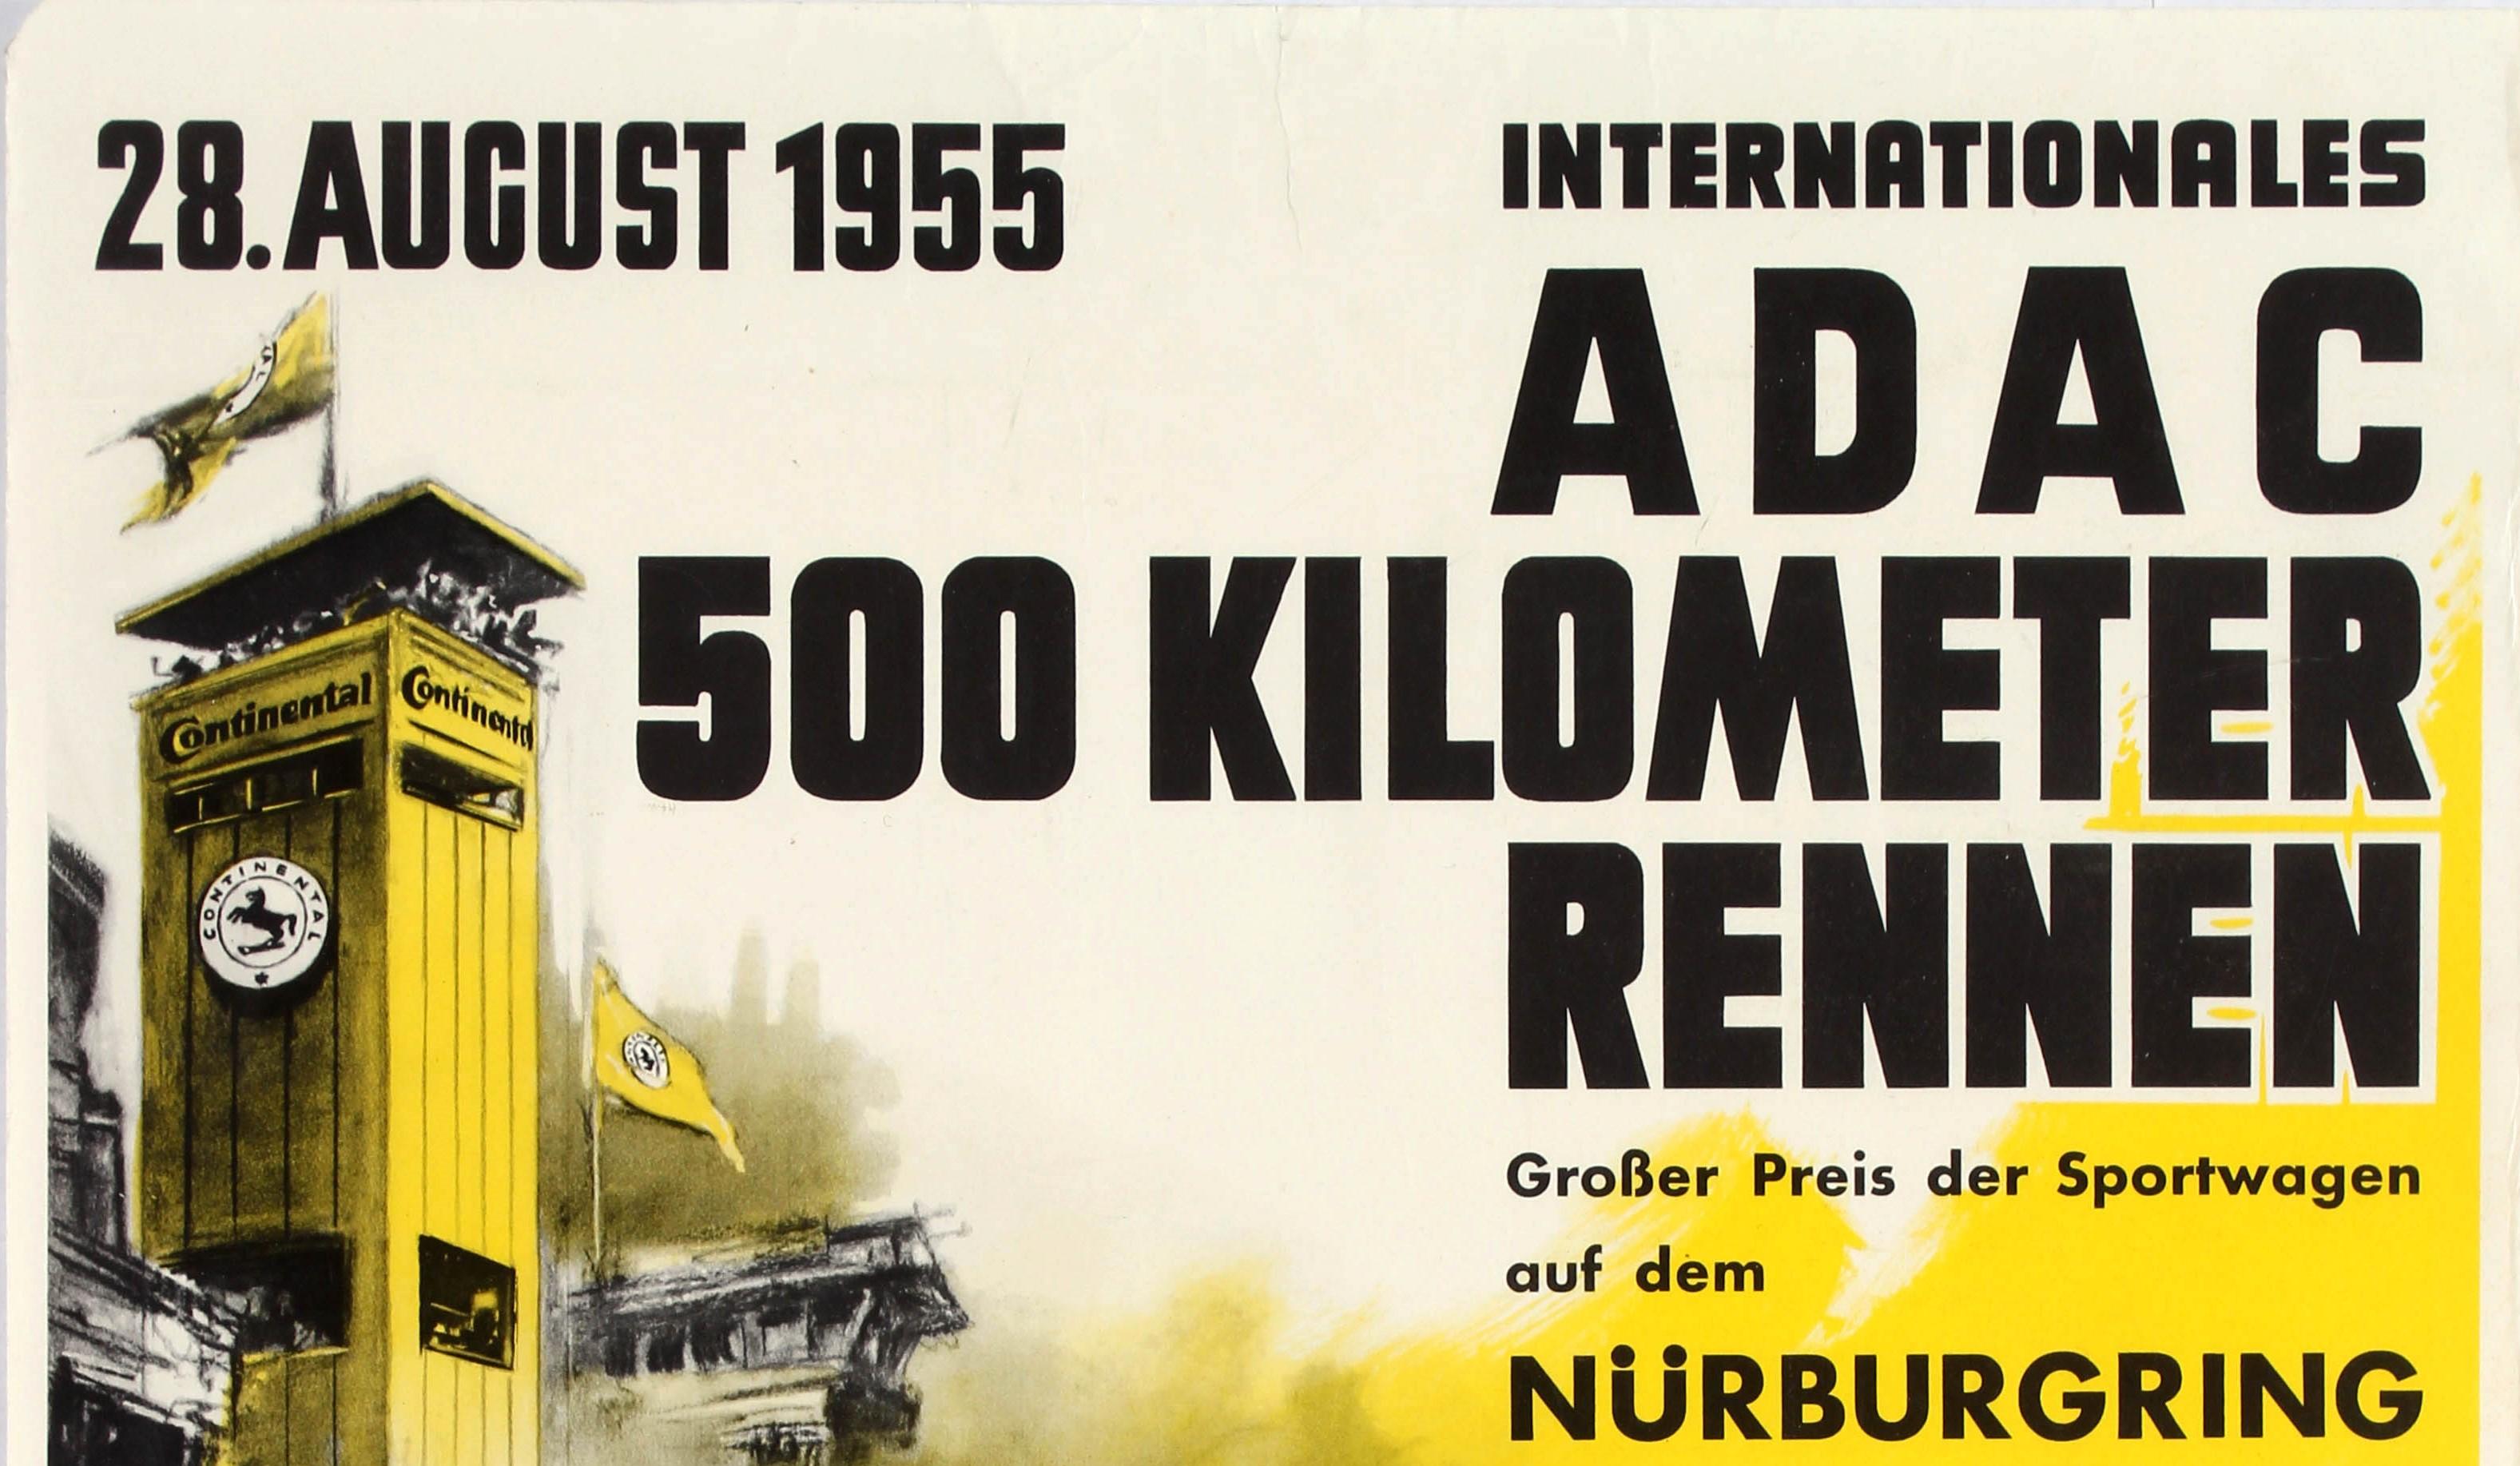 Original vintage German Auto Motorcycle advertising poster for the International ADAC 500 Kilometre Race organised by the German Automobile-Club ADAC and held at the Nurburgring track on 28 August 1955. Dynamic artwork showing a silver car that